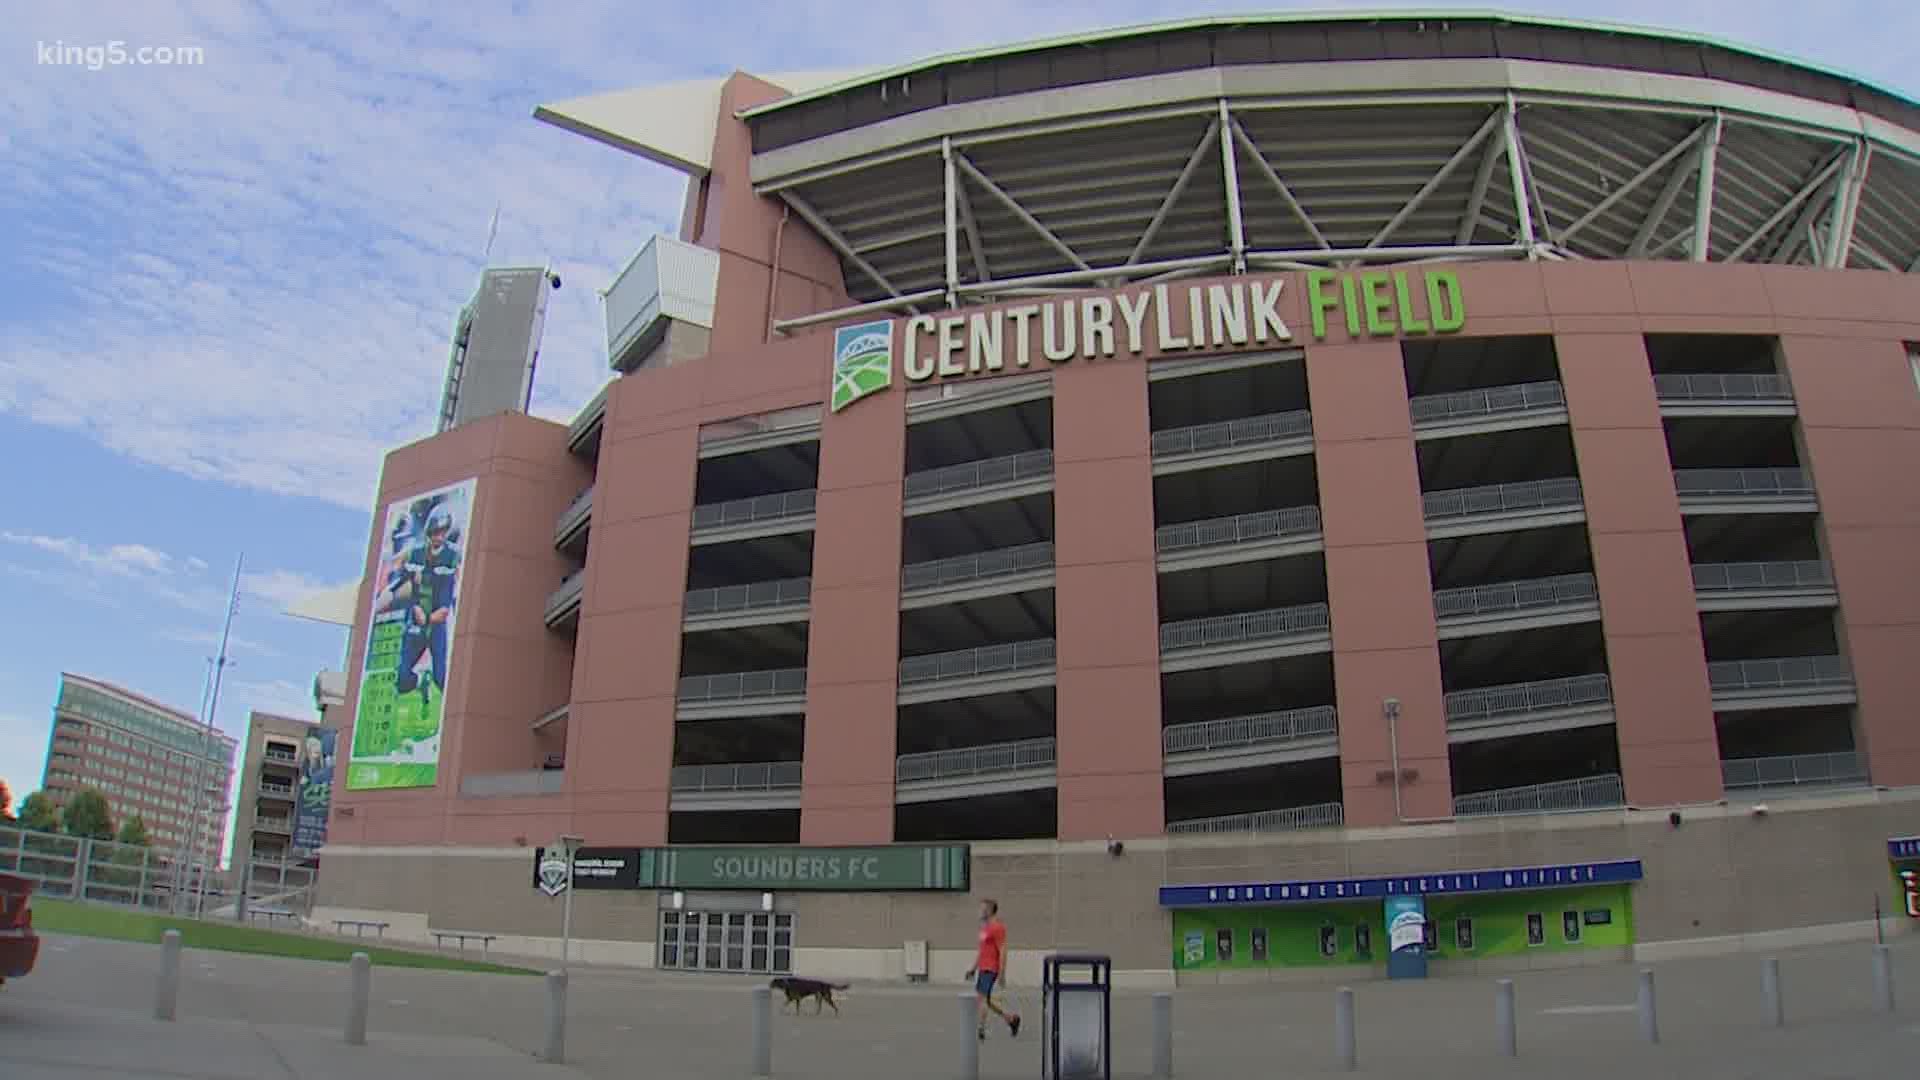 The team said that it will "follow the lead of public health and government officials" on whether to allow fans in CenturyLink Field the remaining five home games.